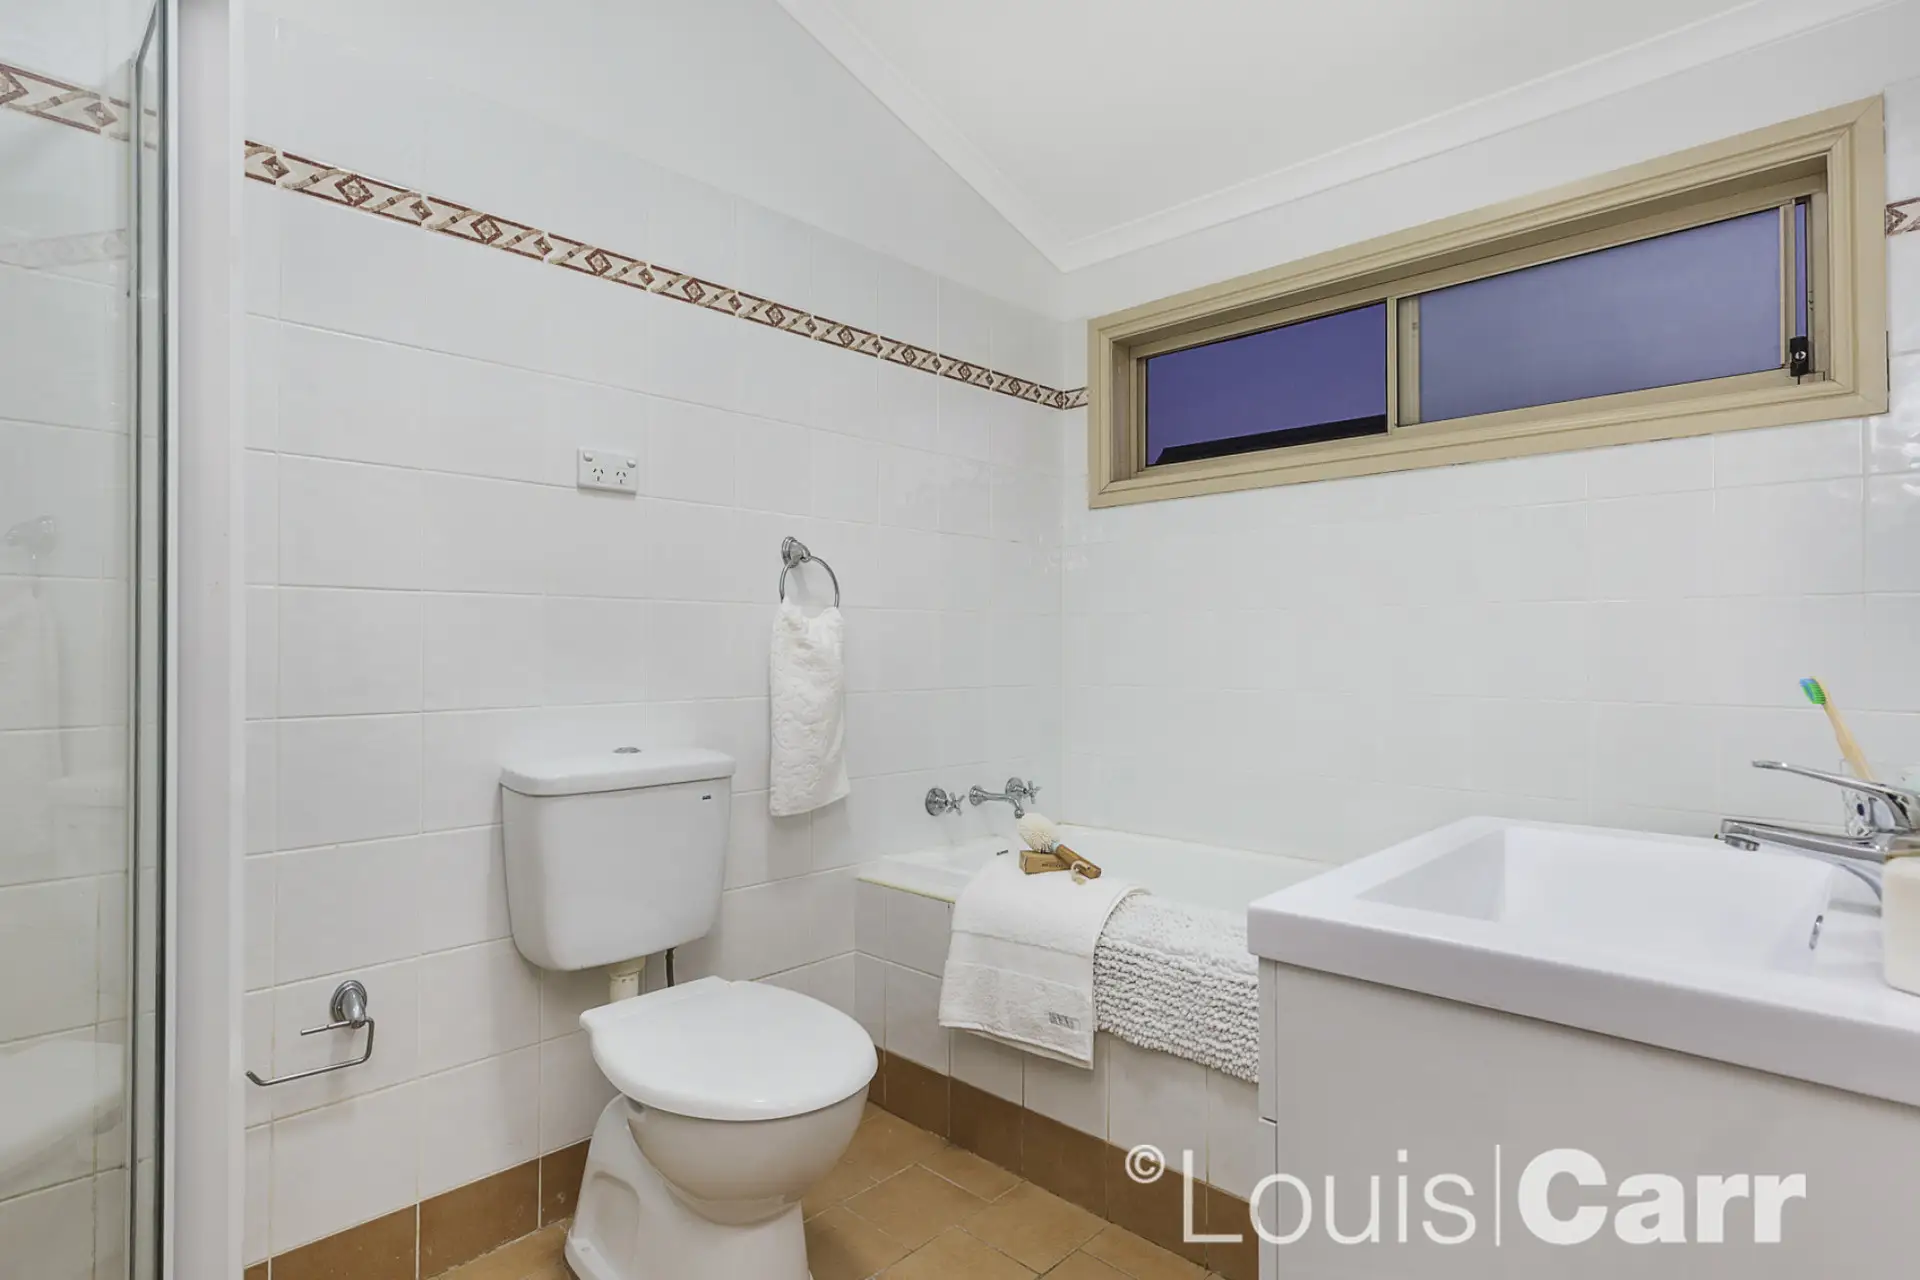 Photo #9: 14/83-93 Railway Street, Baulkham Hills - Sold by Louis Carr Real Estate